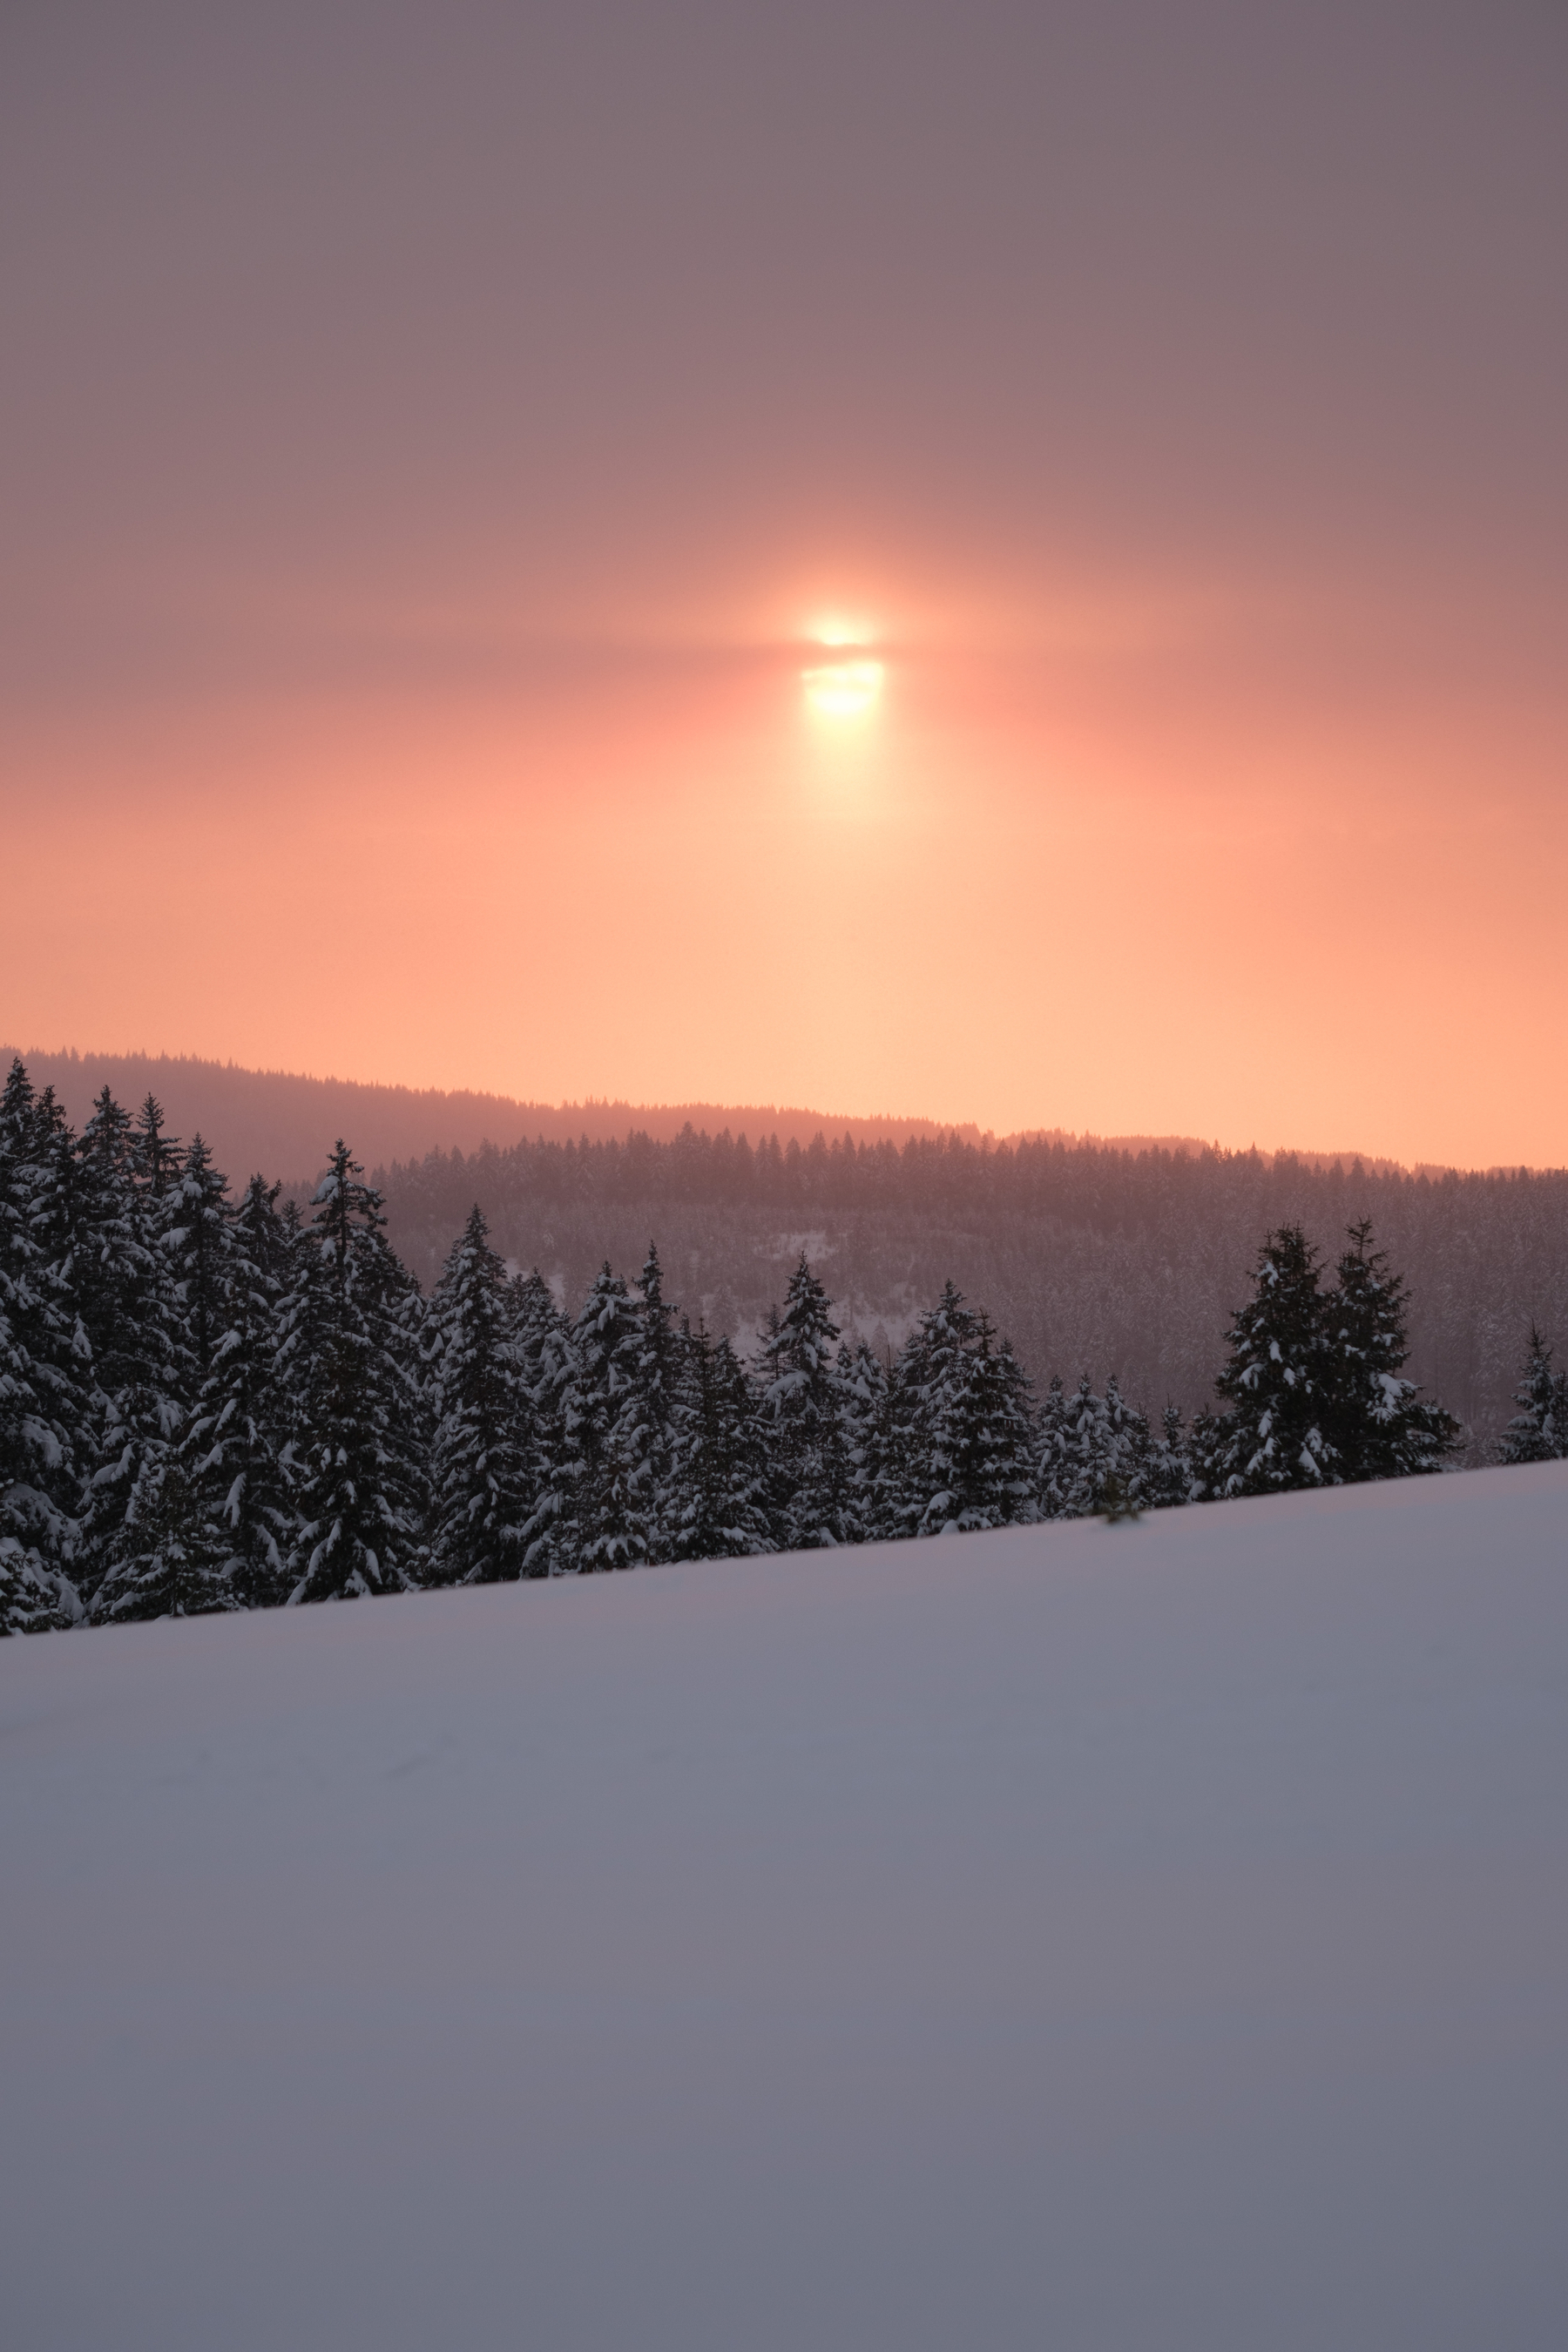 Pink and orange sunset on a mountain. The setting sun is obscured by light clouds and haze. The photographer is surrounded by snow and on various layers in the distance trees are visible on mountain sides. 